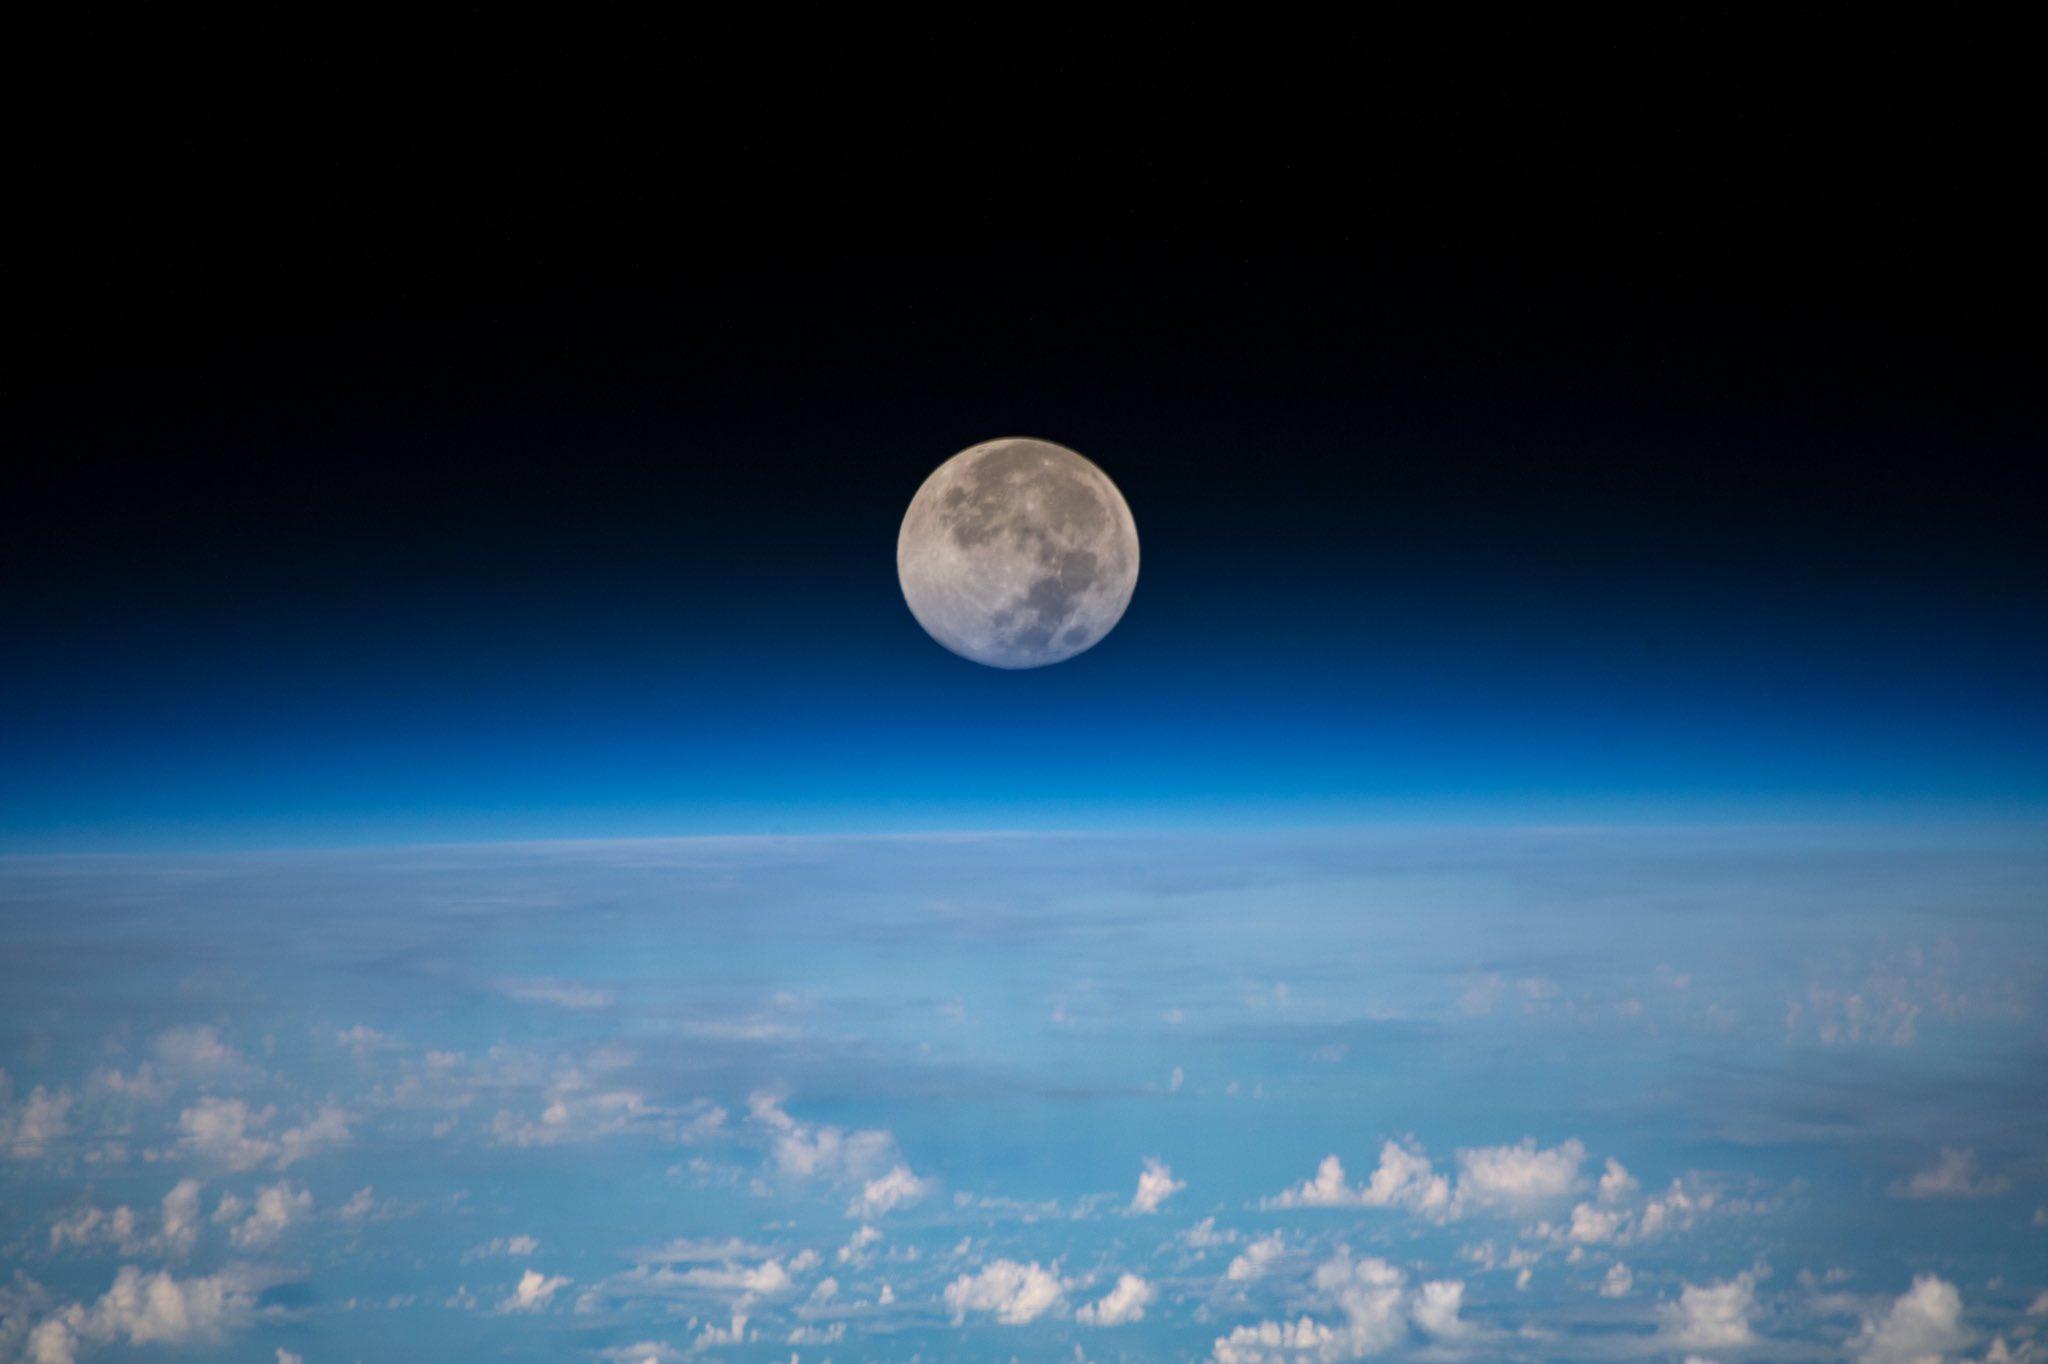 nasa-shares-photos-of-the-full-moon-from-outer-space-gma-news-online